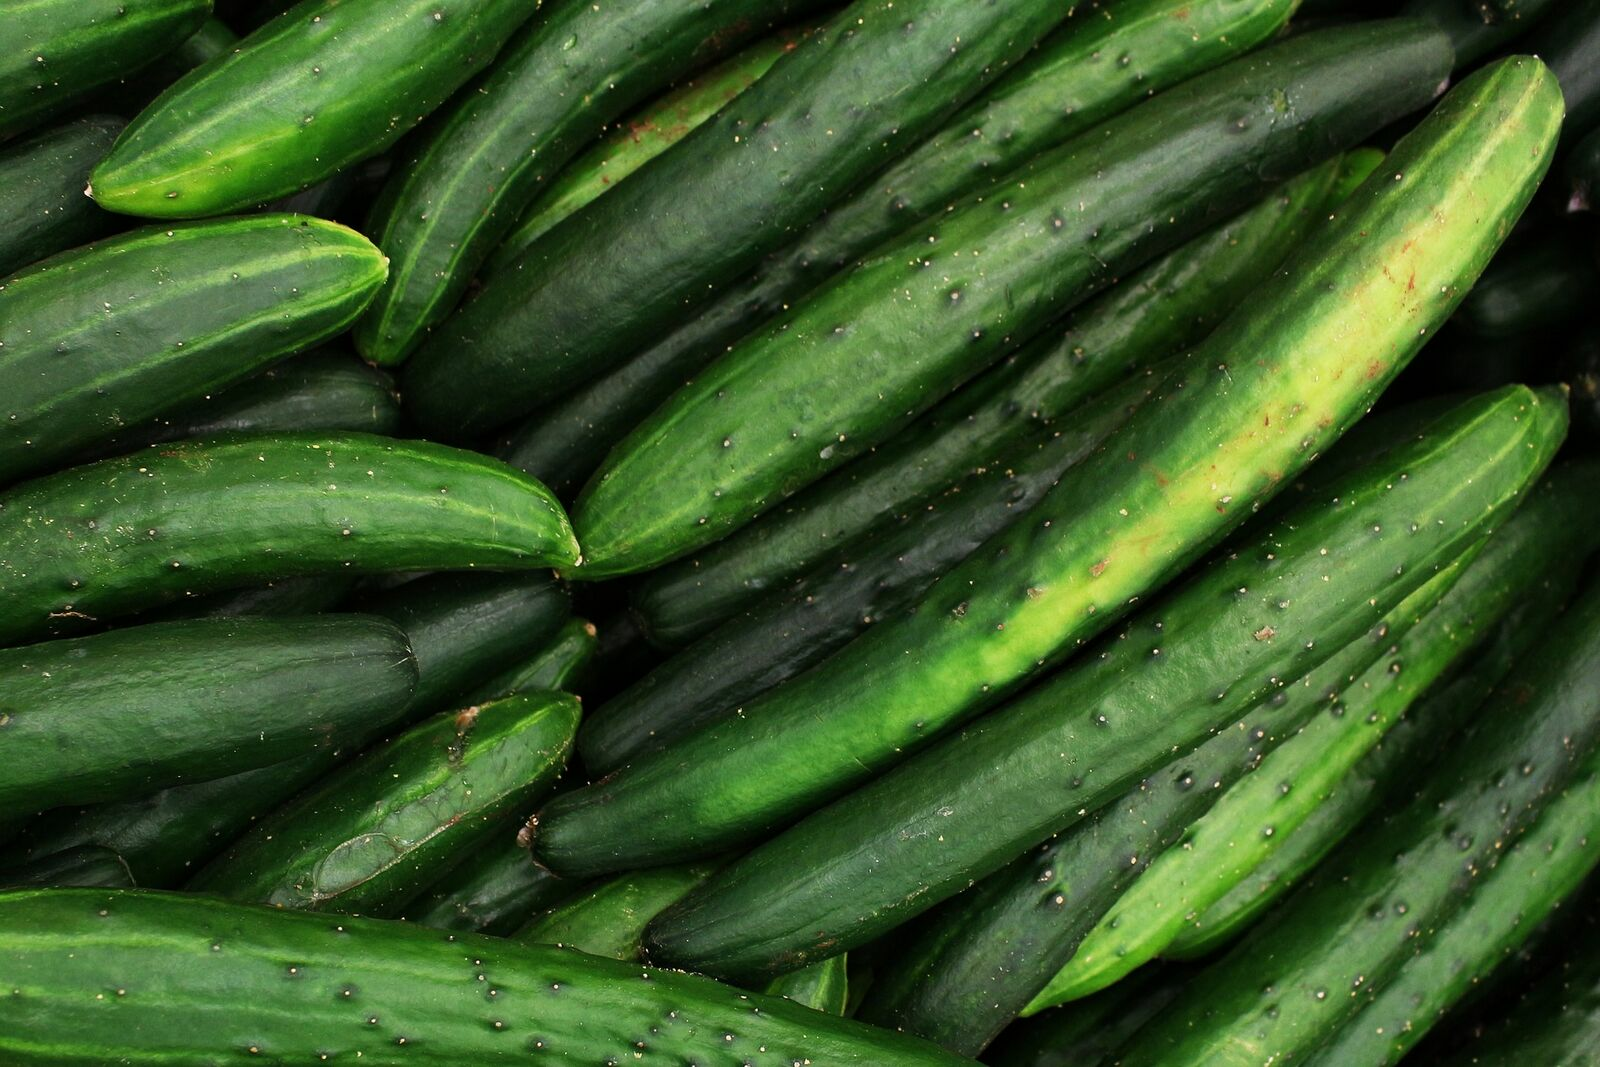 Cucumber varieties: About salad cucumbers and pickles